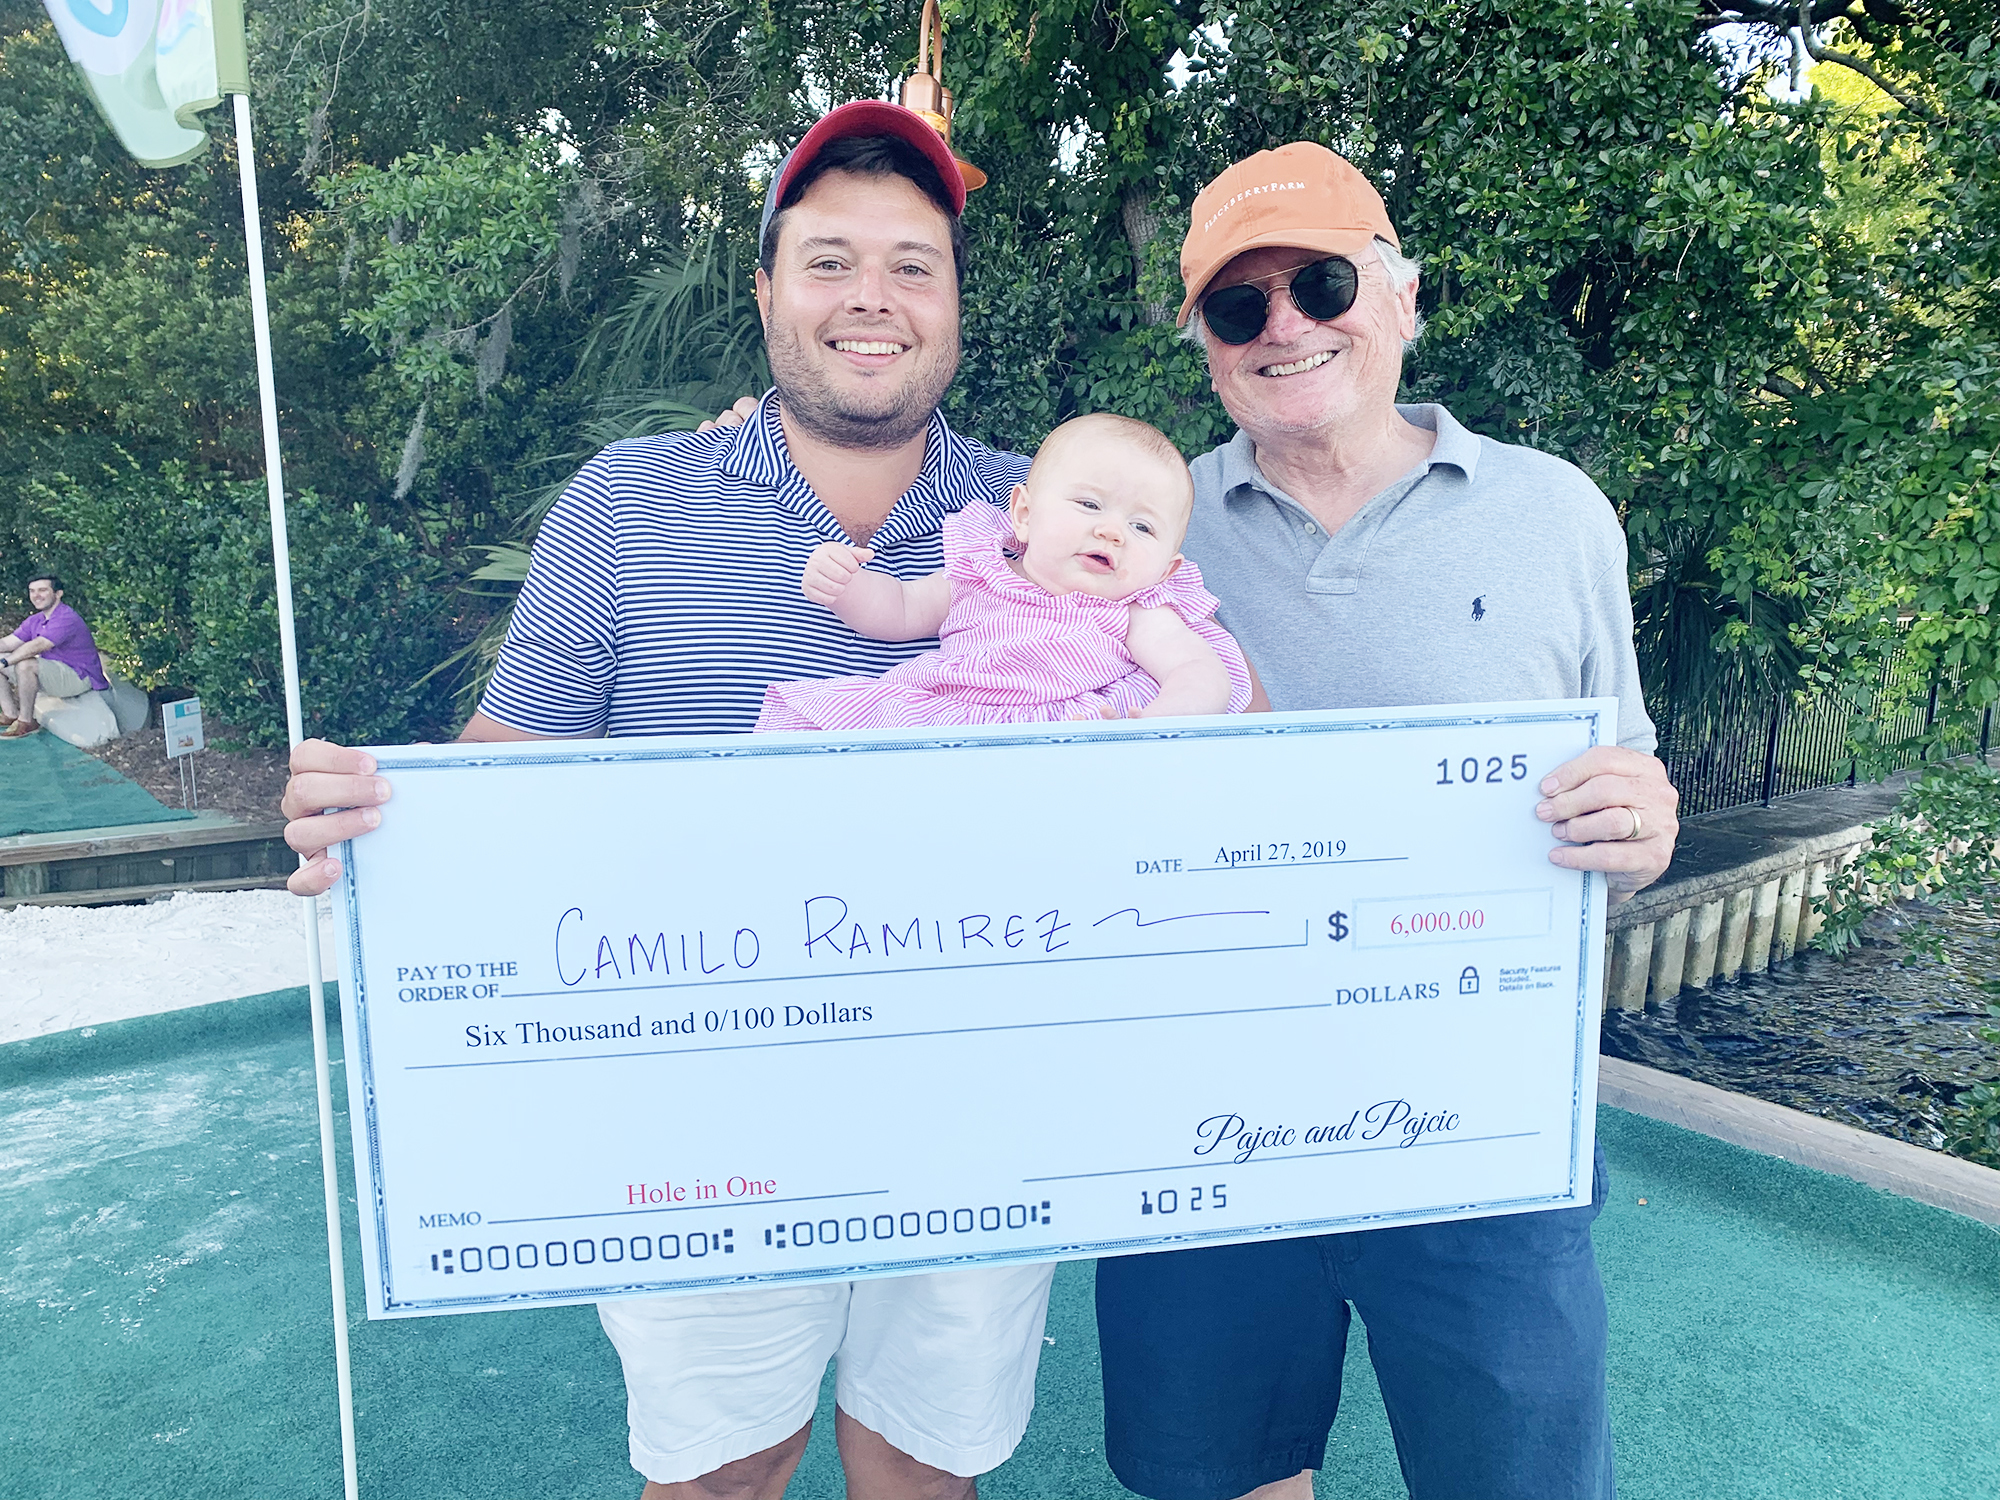 Special to the Daily Record Camilo Ramirez, left, won a $6,000 prize by sinking a hole-in-one at the yard golf event presented by the Pajcic & Pajcic law firm. He’s shown with 8-month-old daughter, Reid, and attorney Steve Pajcic.